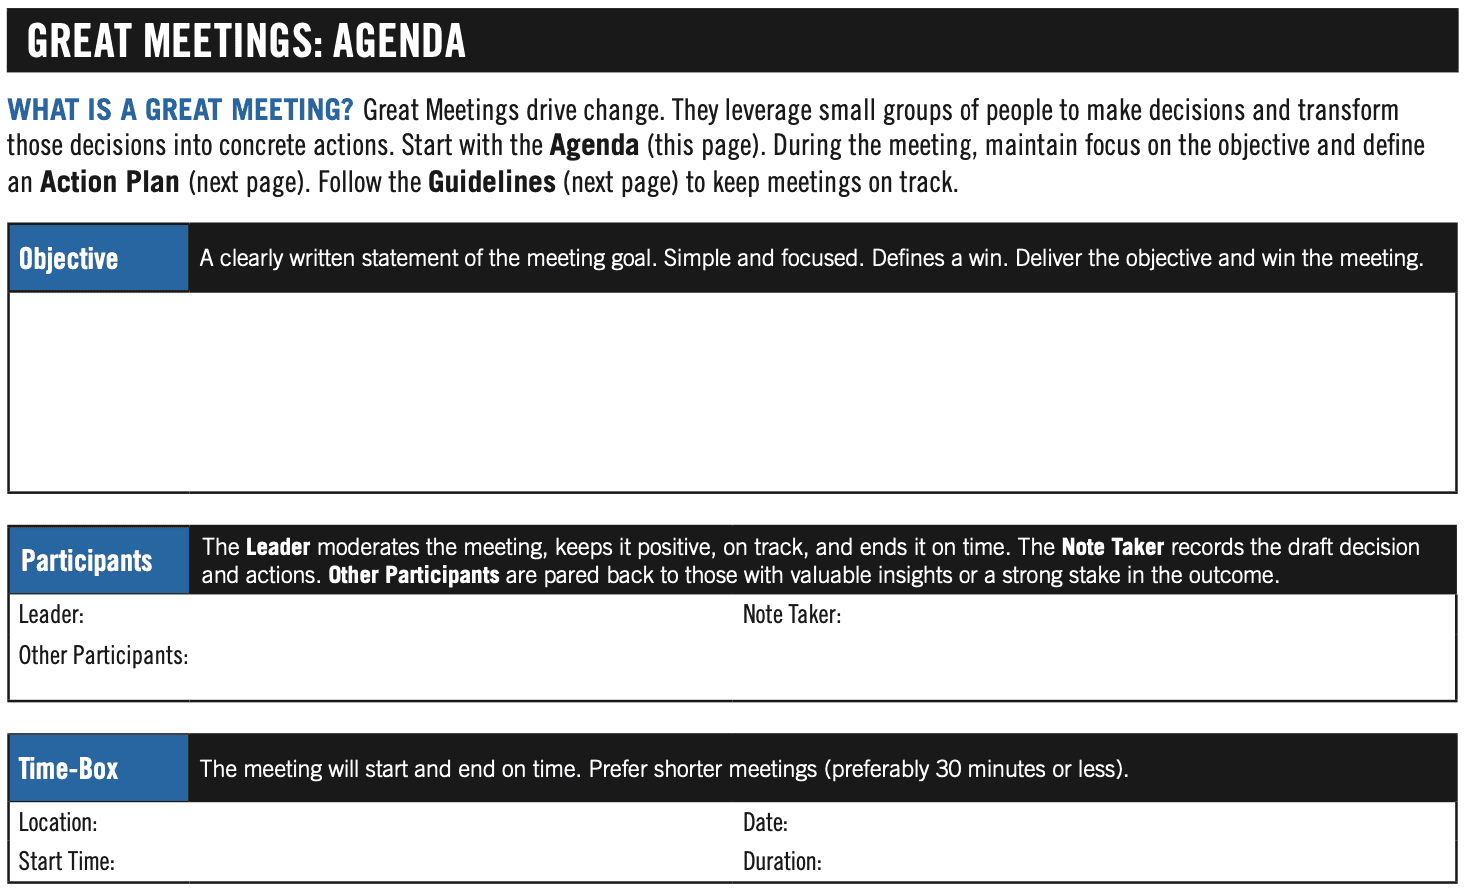 Blank template to fill out with information about how to conduct a great meeting.